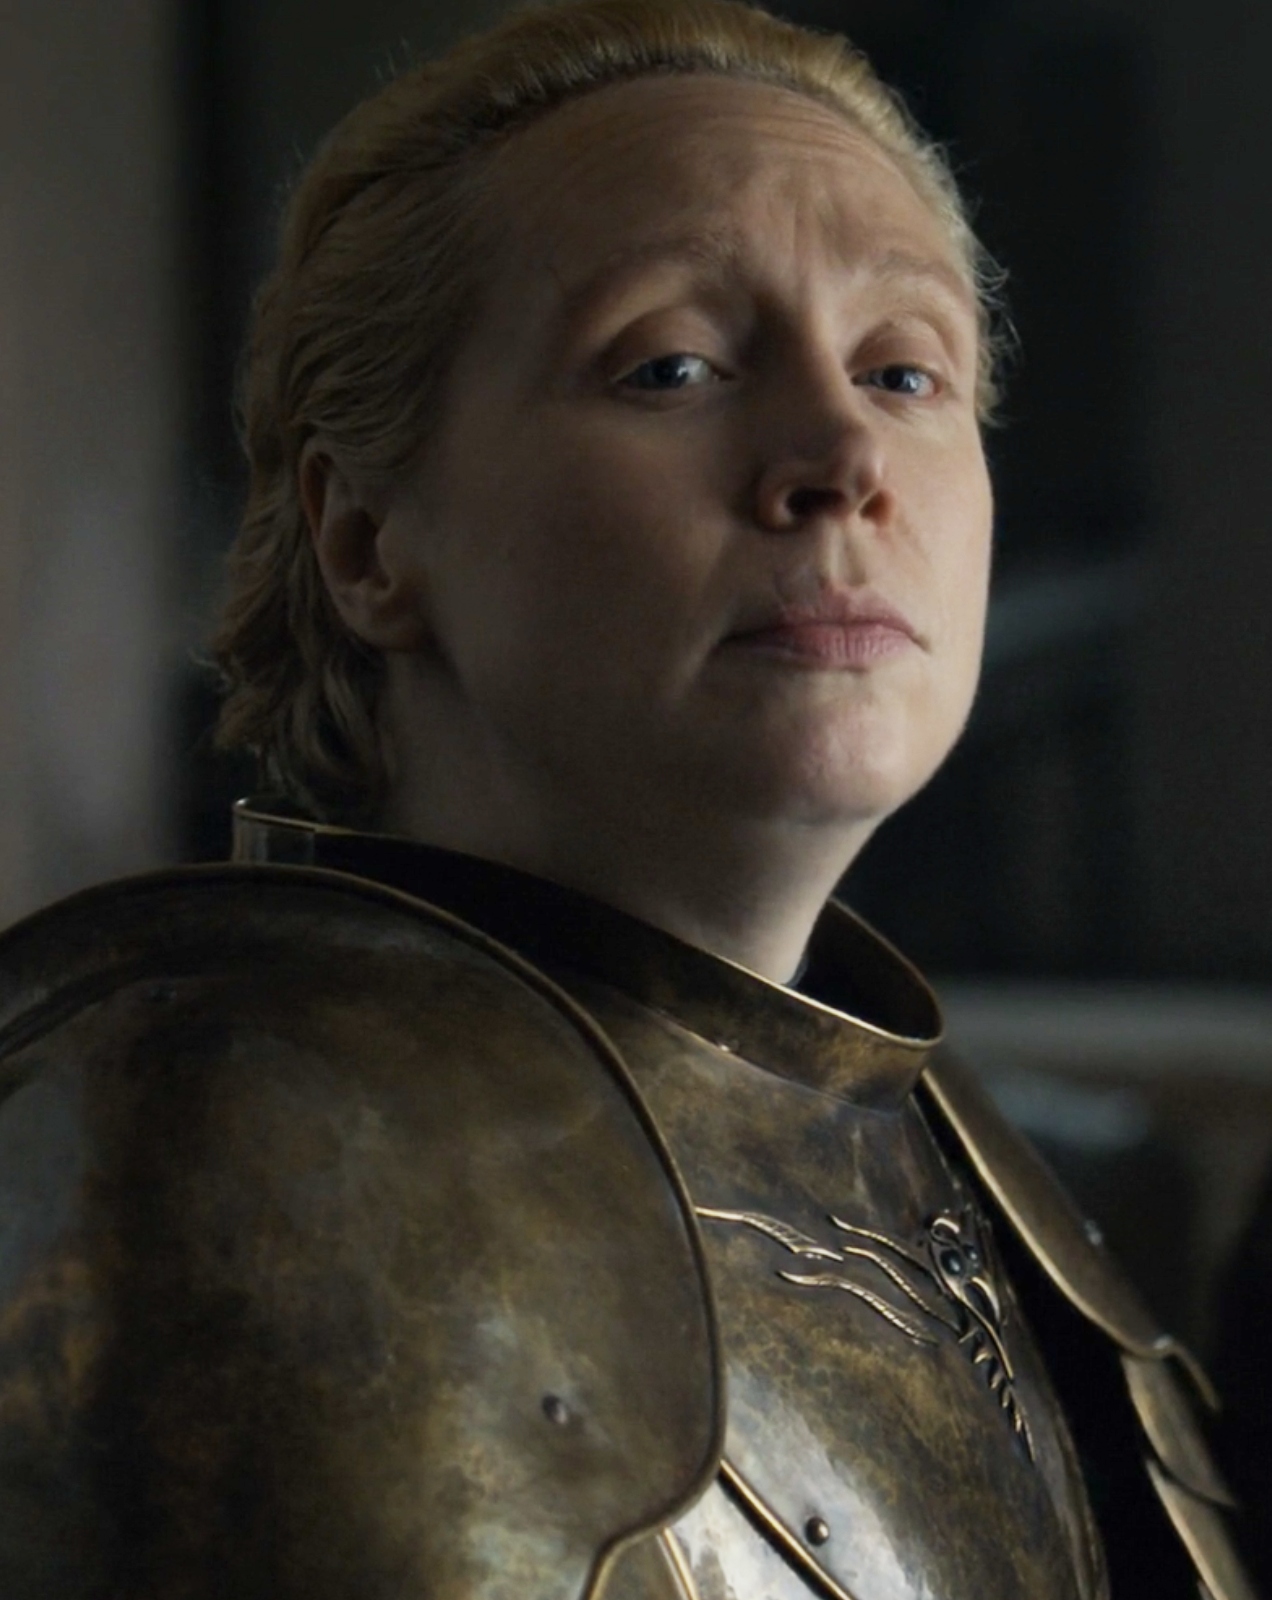 We first meet Brienne in Season 2, Episode 3 where she duels with Ser Loras ...